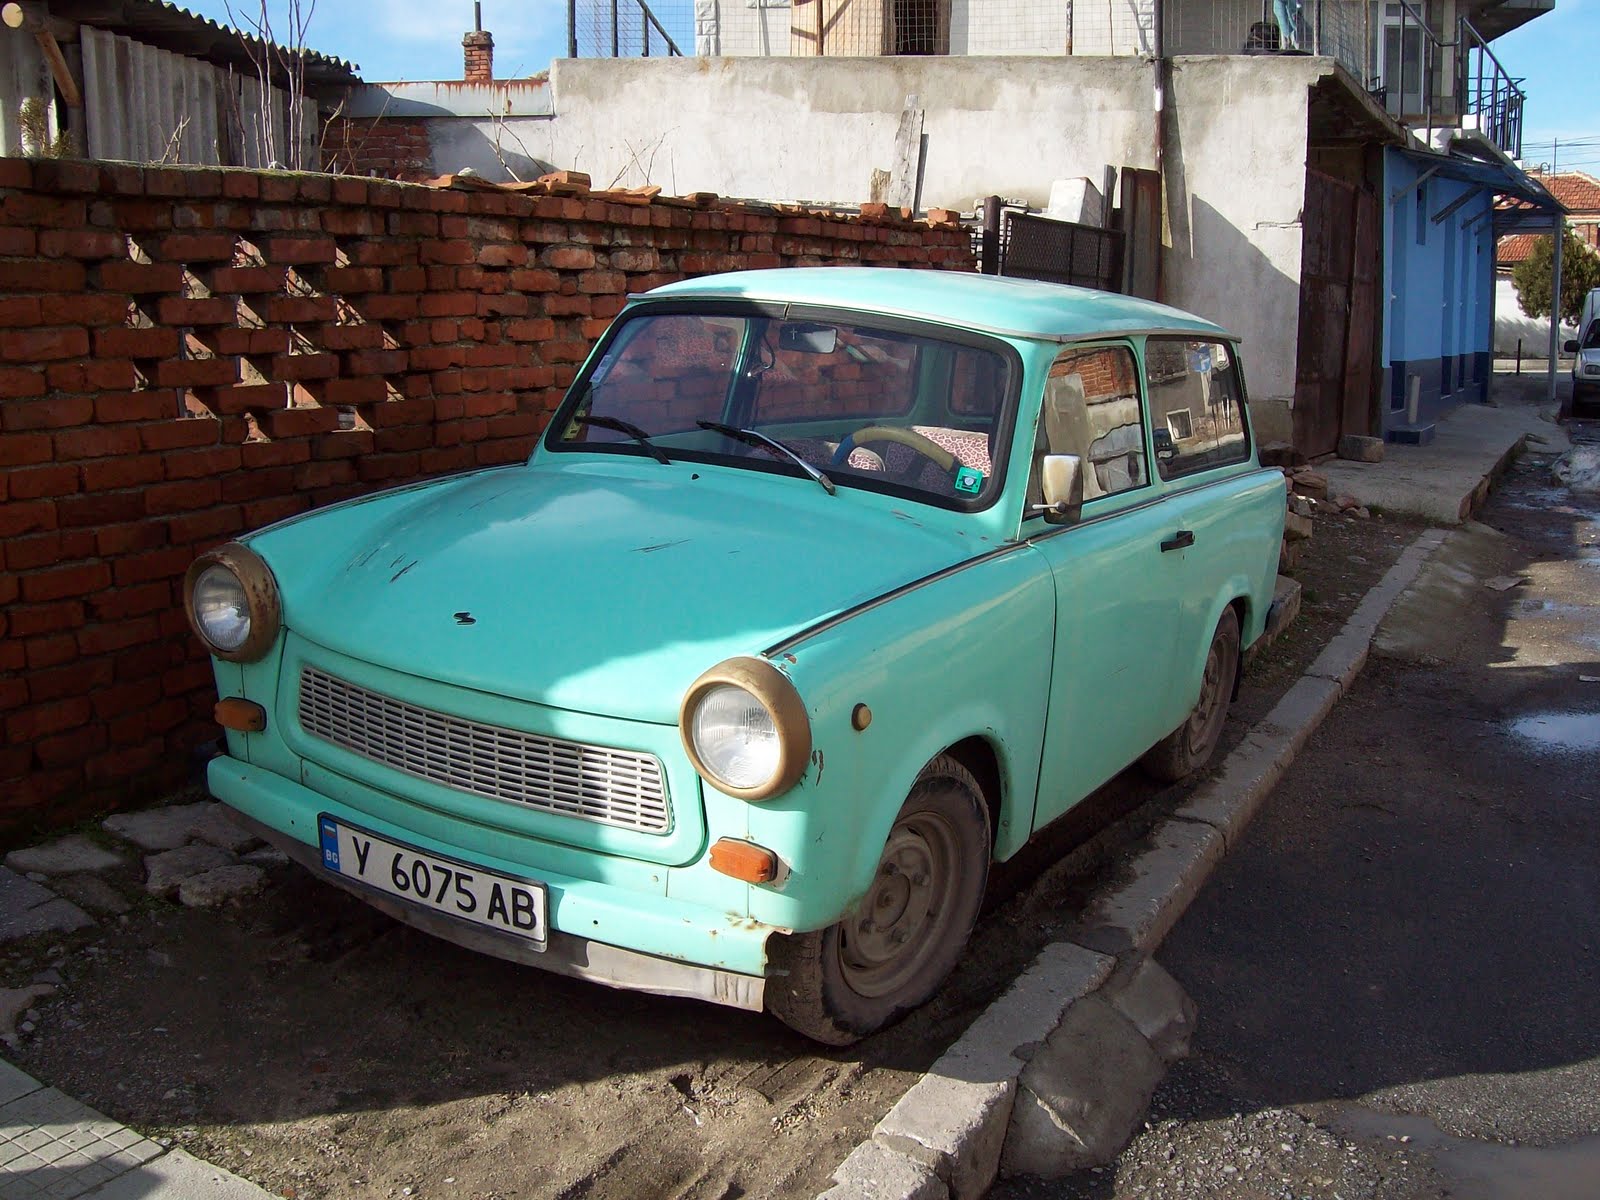 [yambol+daily+picture+19+3+10+A+Turquiose+Trabant+Parked+Up+In+Yambol.jpg]